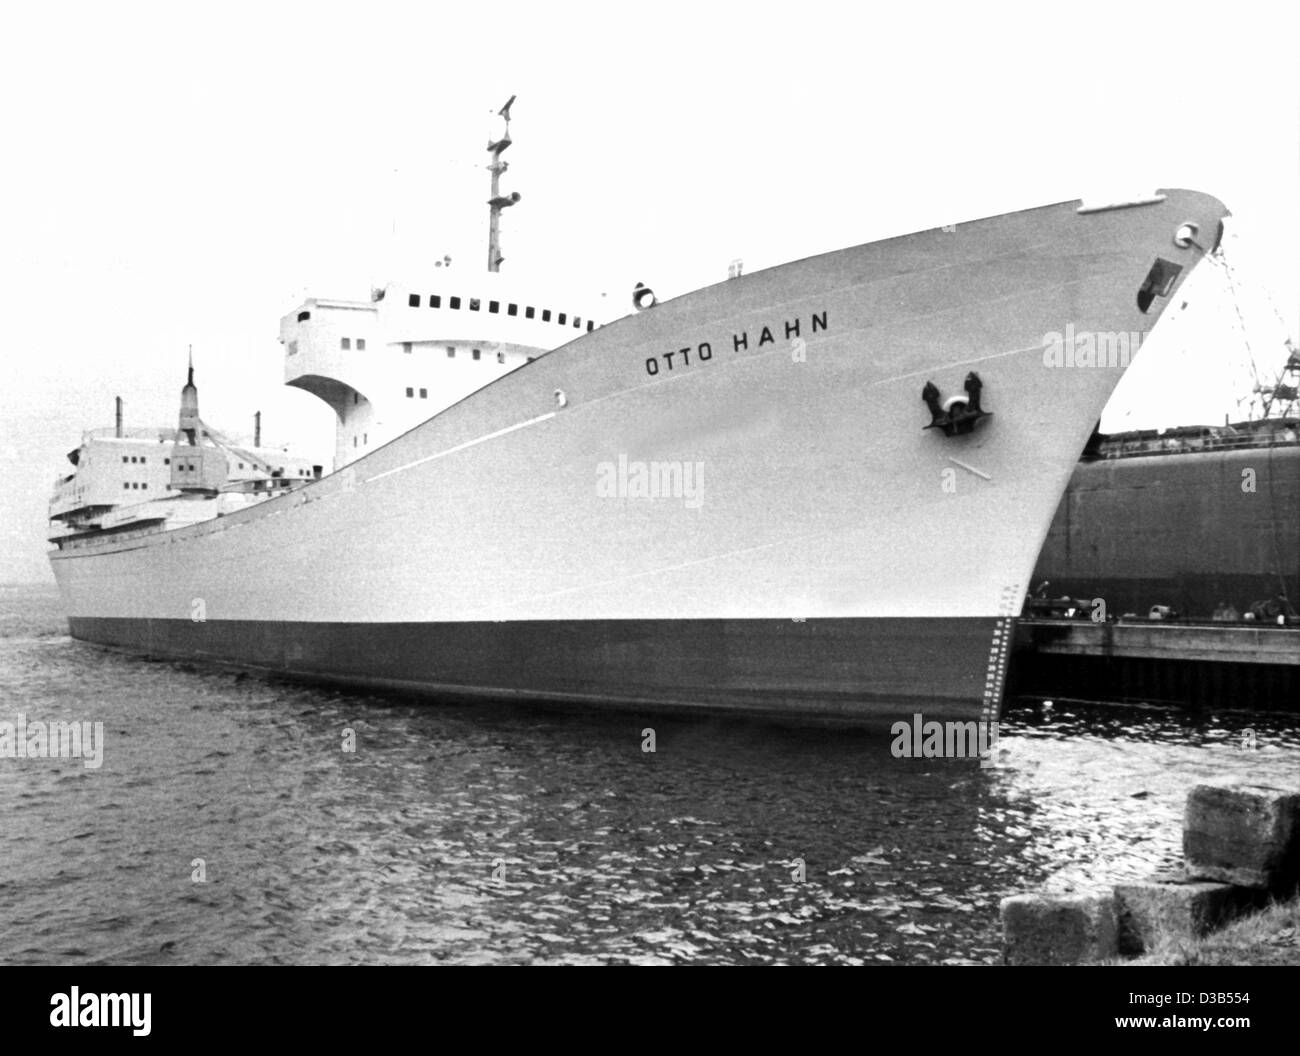 (dpa files) - The first and up to now only German nuclear-powered freighter 'Otto Hahn' (undated filer). The first European nuclear experimental ship for the merchant marine was christened on 13 June 1964 under the presence of its eponym, Nobel Prize winner Otto Hahn, discoverer of nuclear fission.  Stock Photo